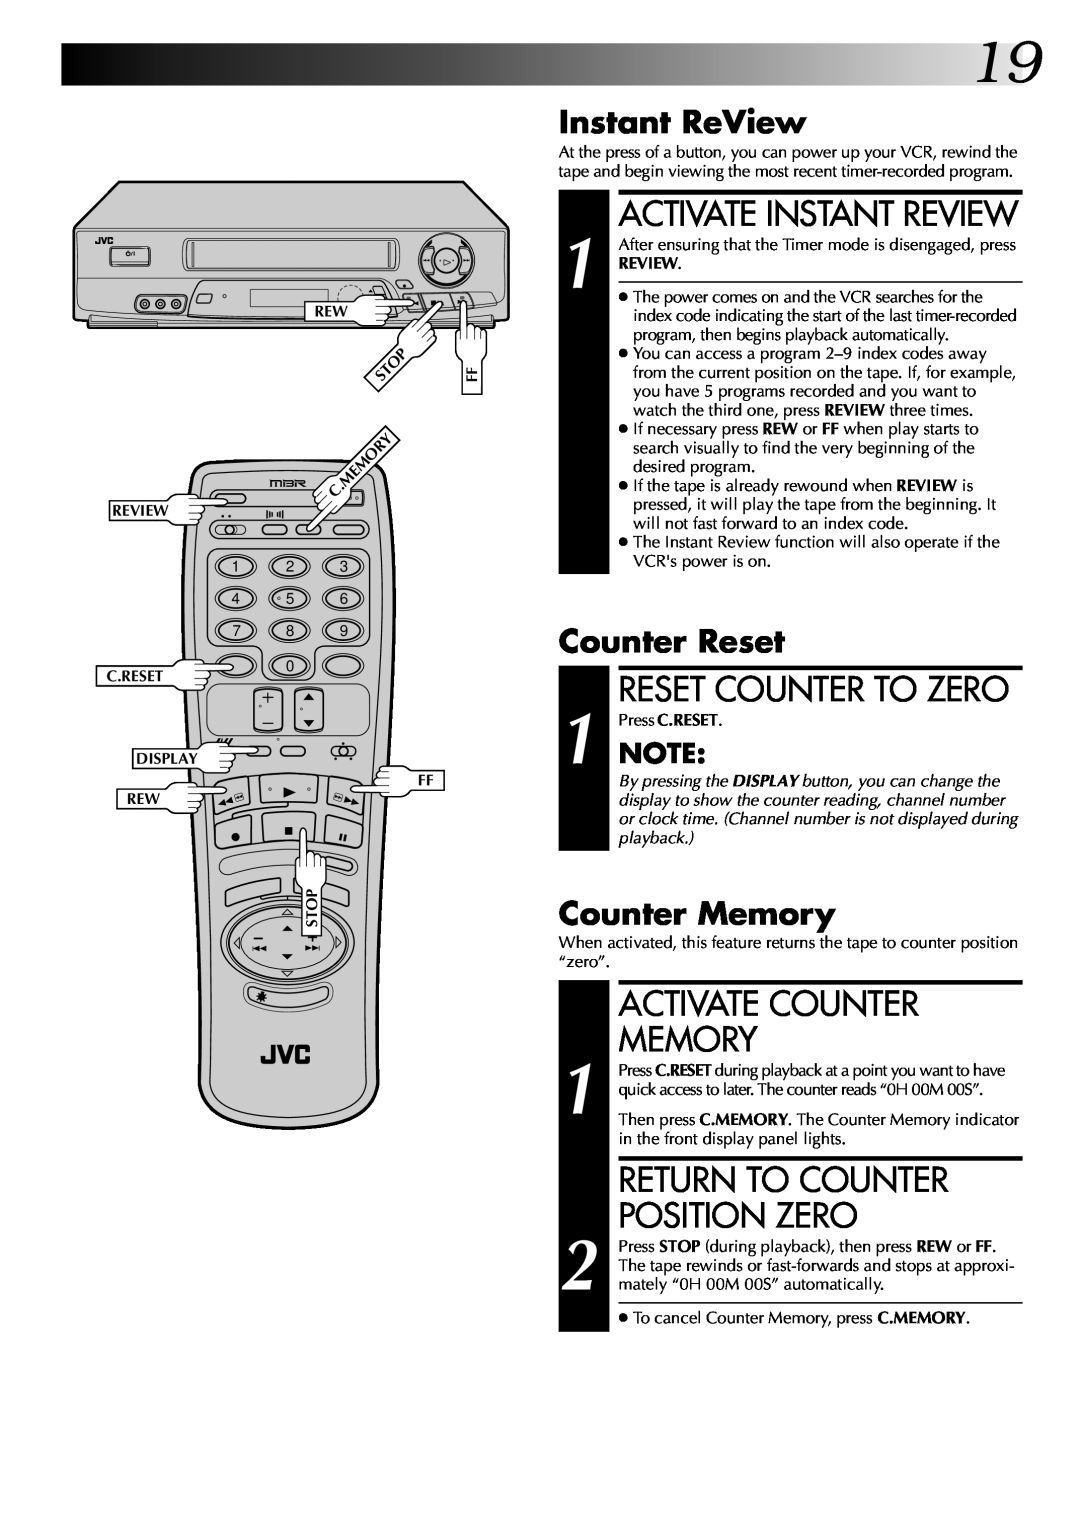 JVC HR-J7004UM manual Activate Counter, Return To Counter Position Zero, Instant ReView, Counter Reset, Counter Memory 